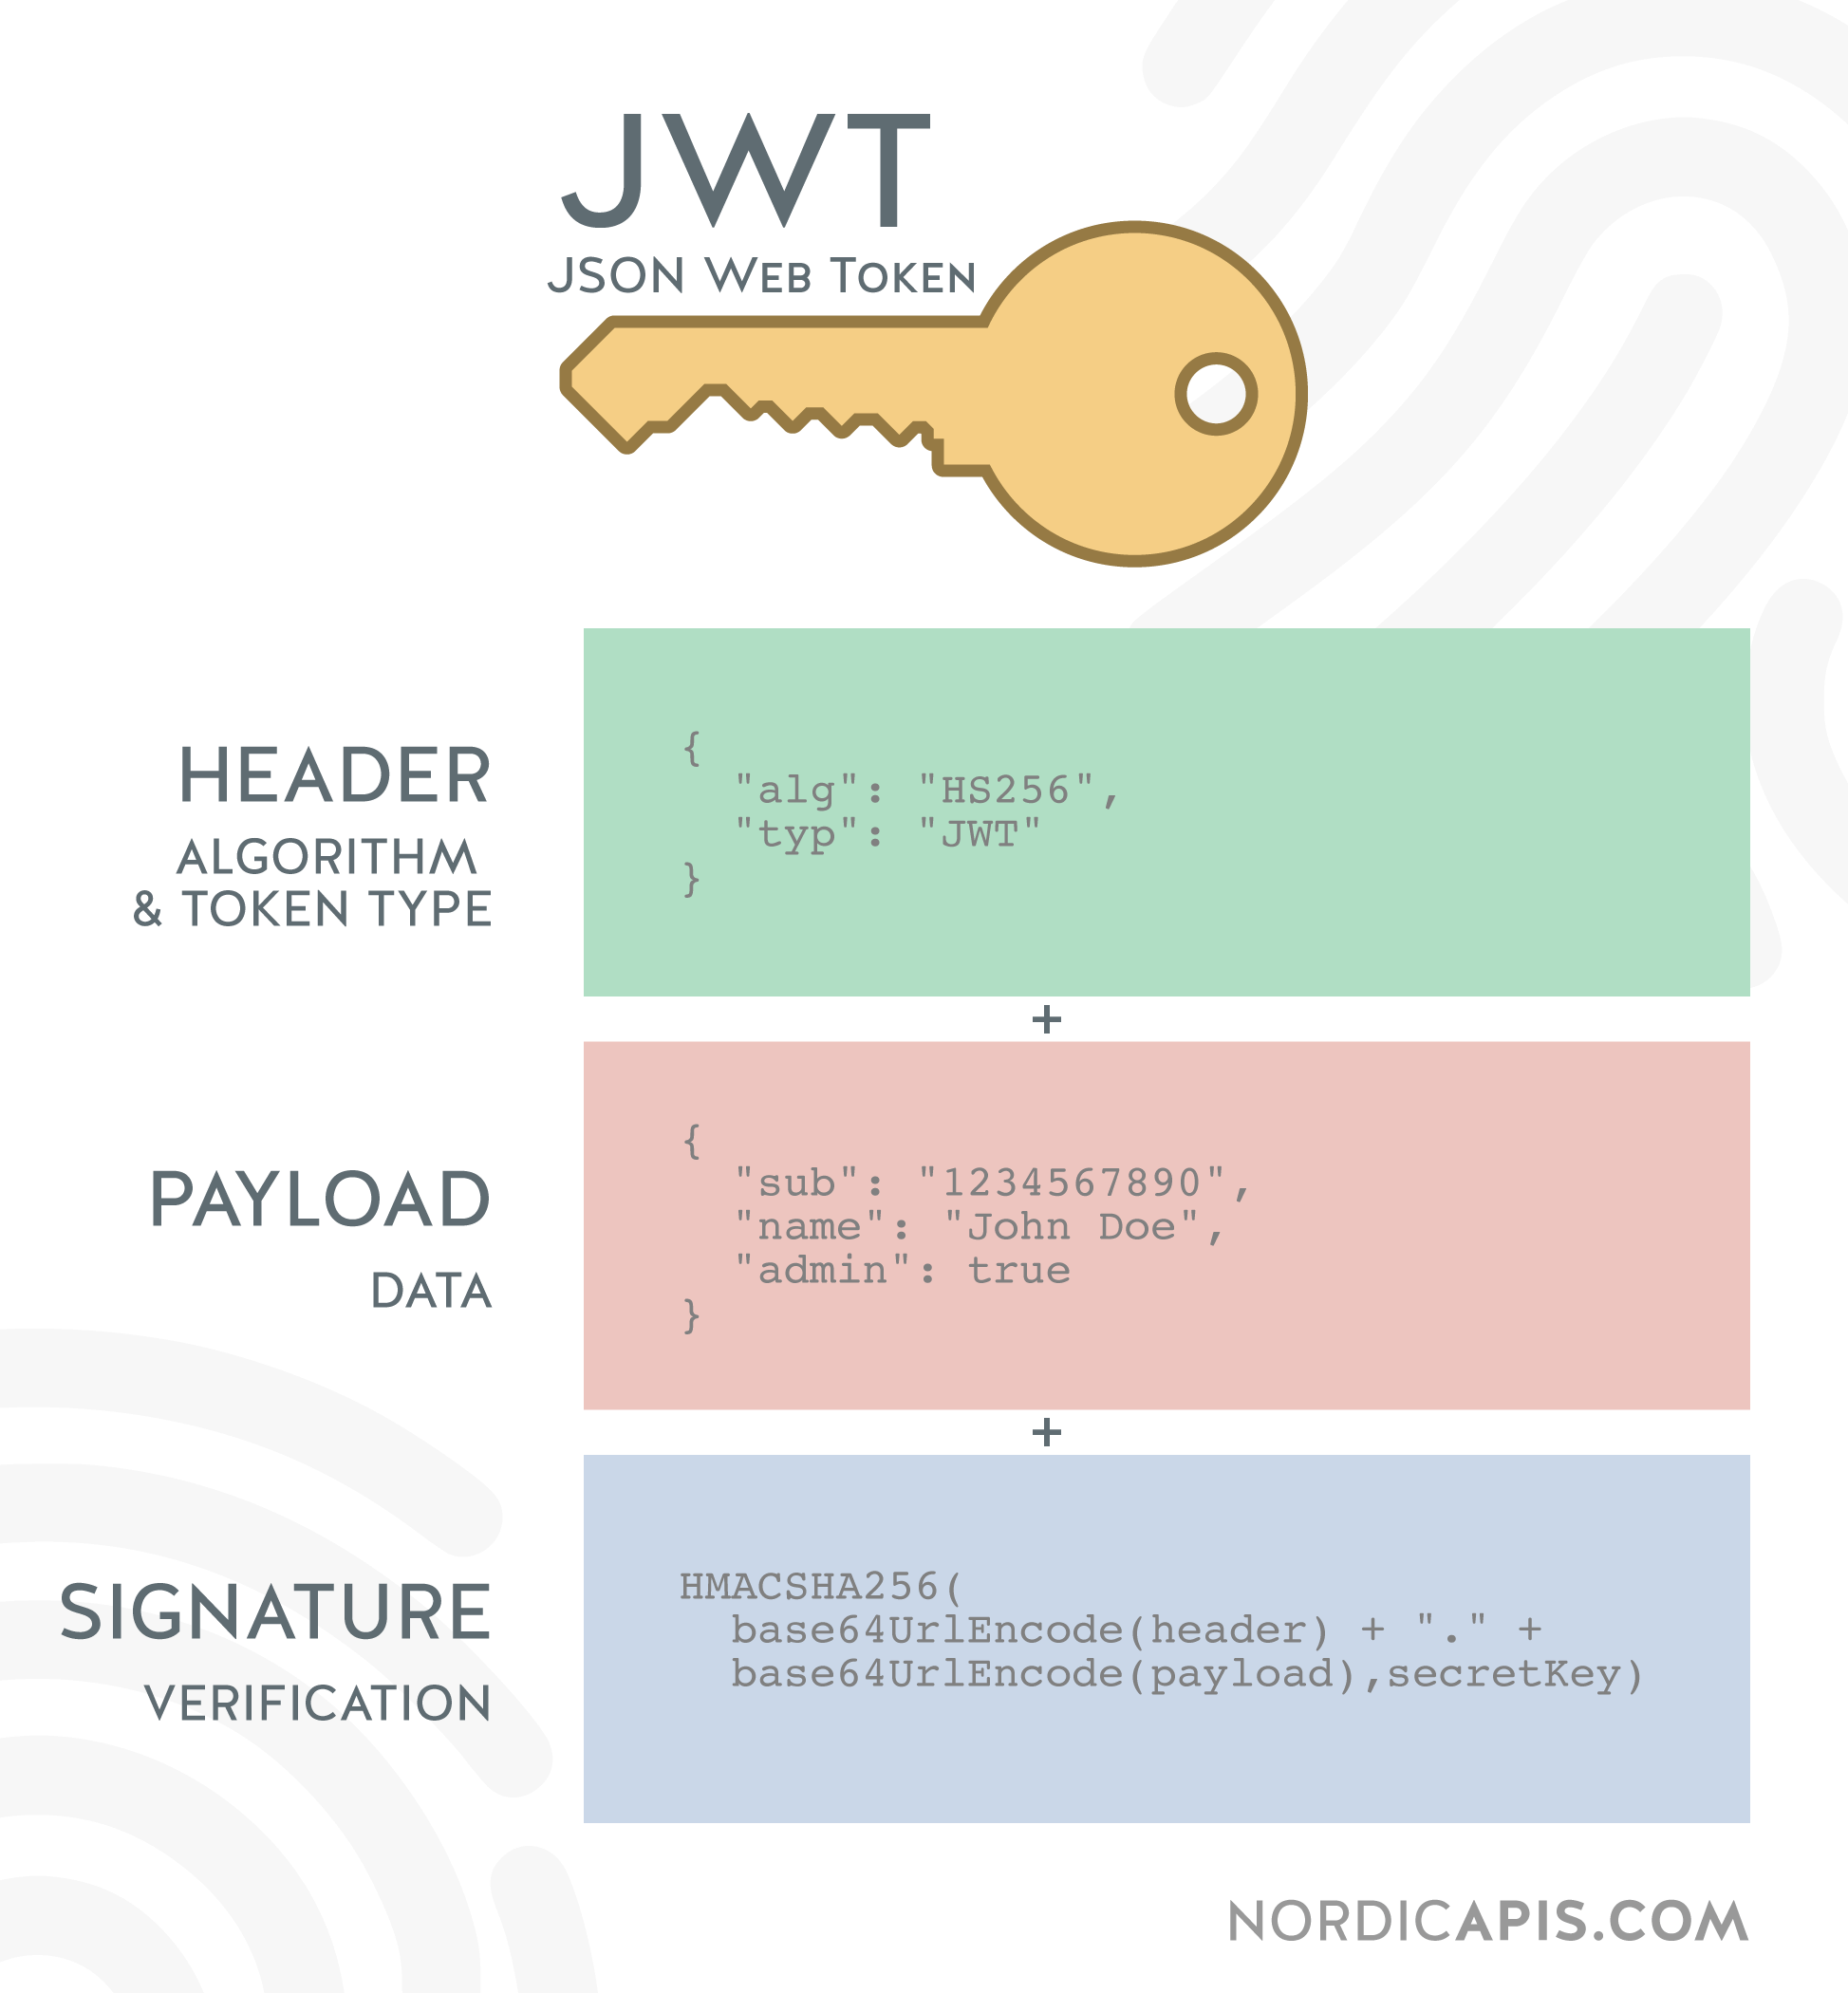 Why-Cant-I-Just-Send-JWTs-Without-OAuth-JWT